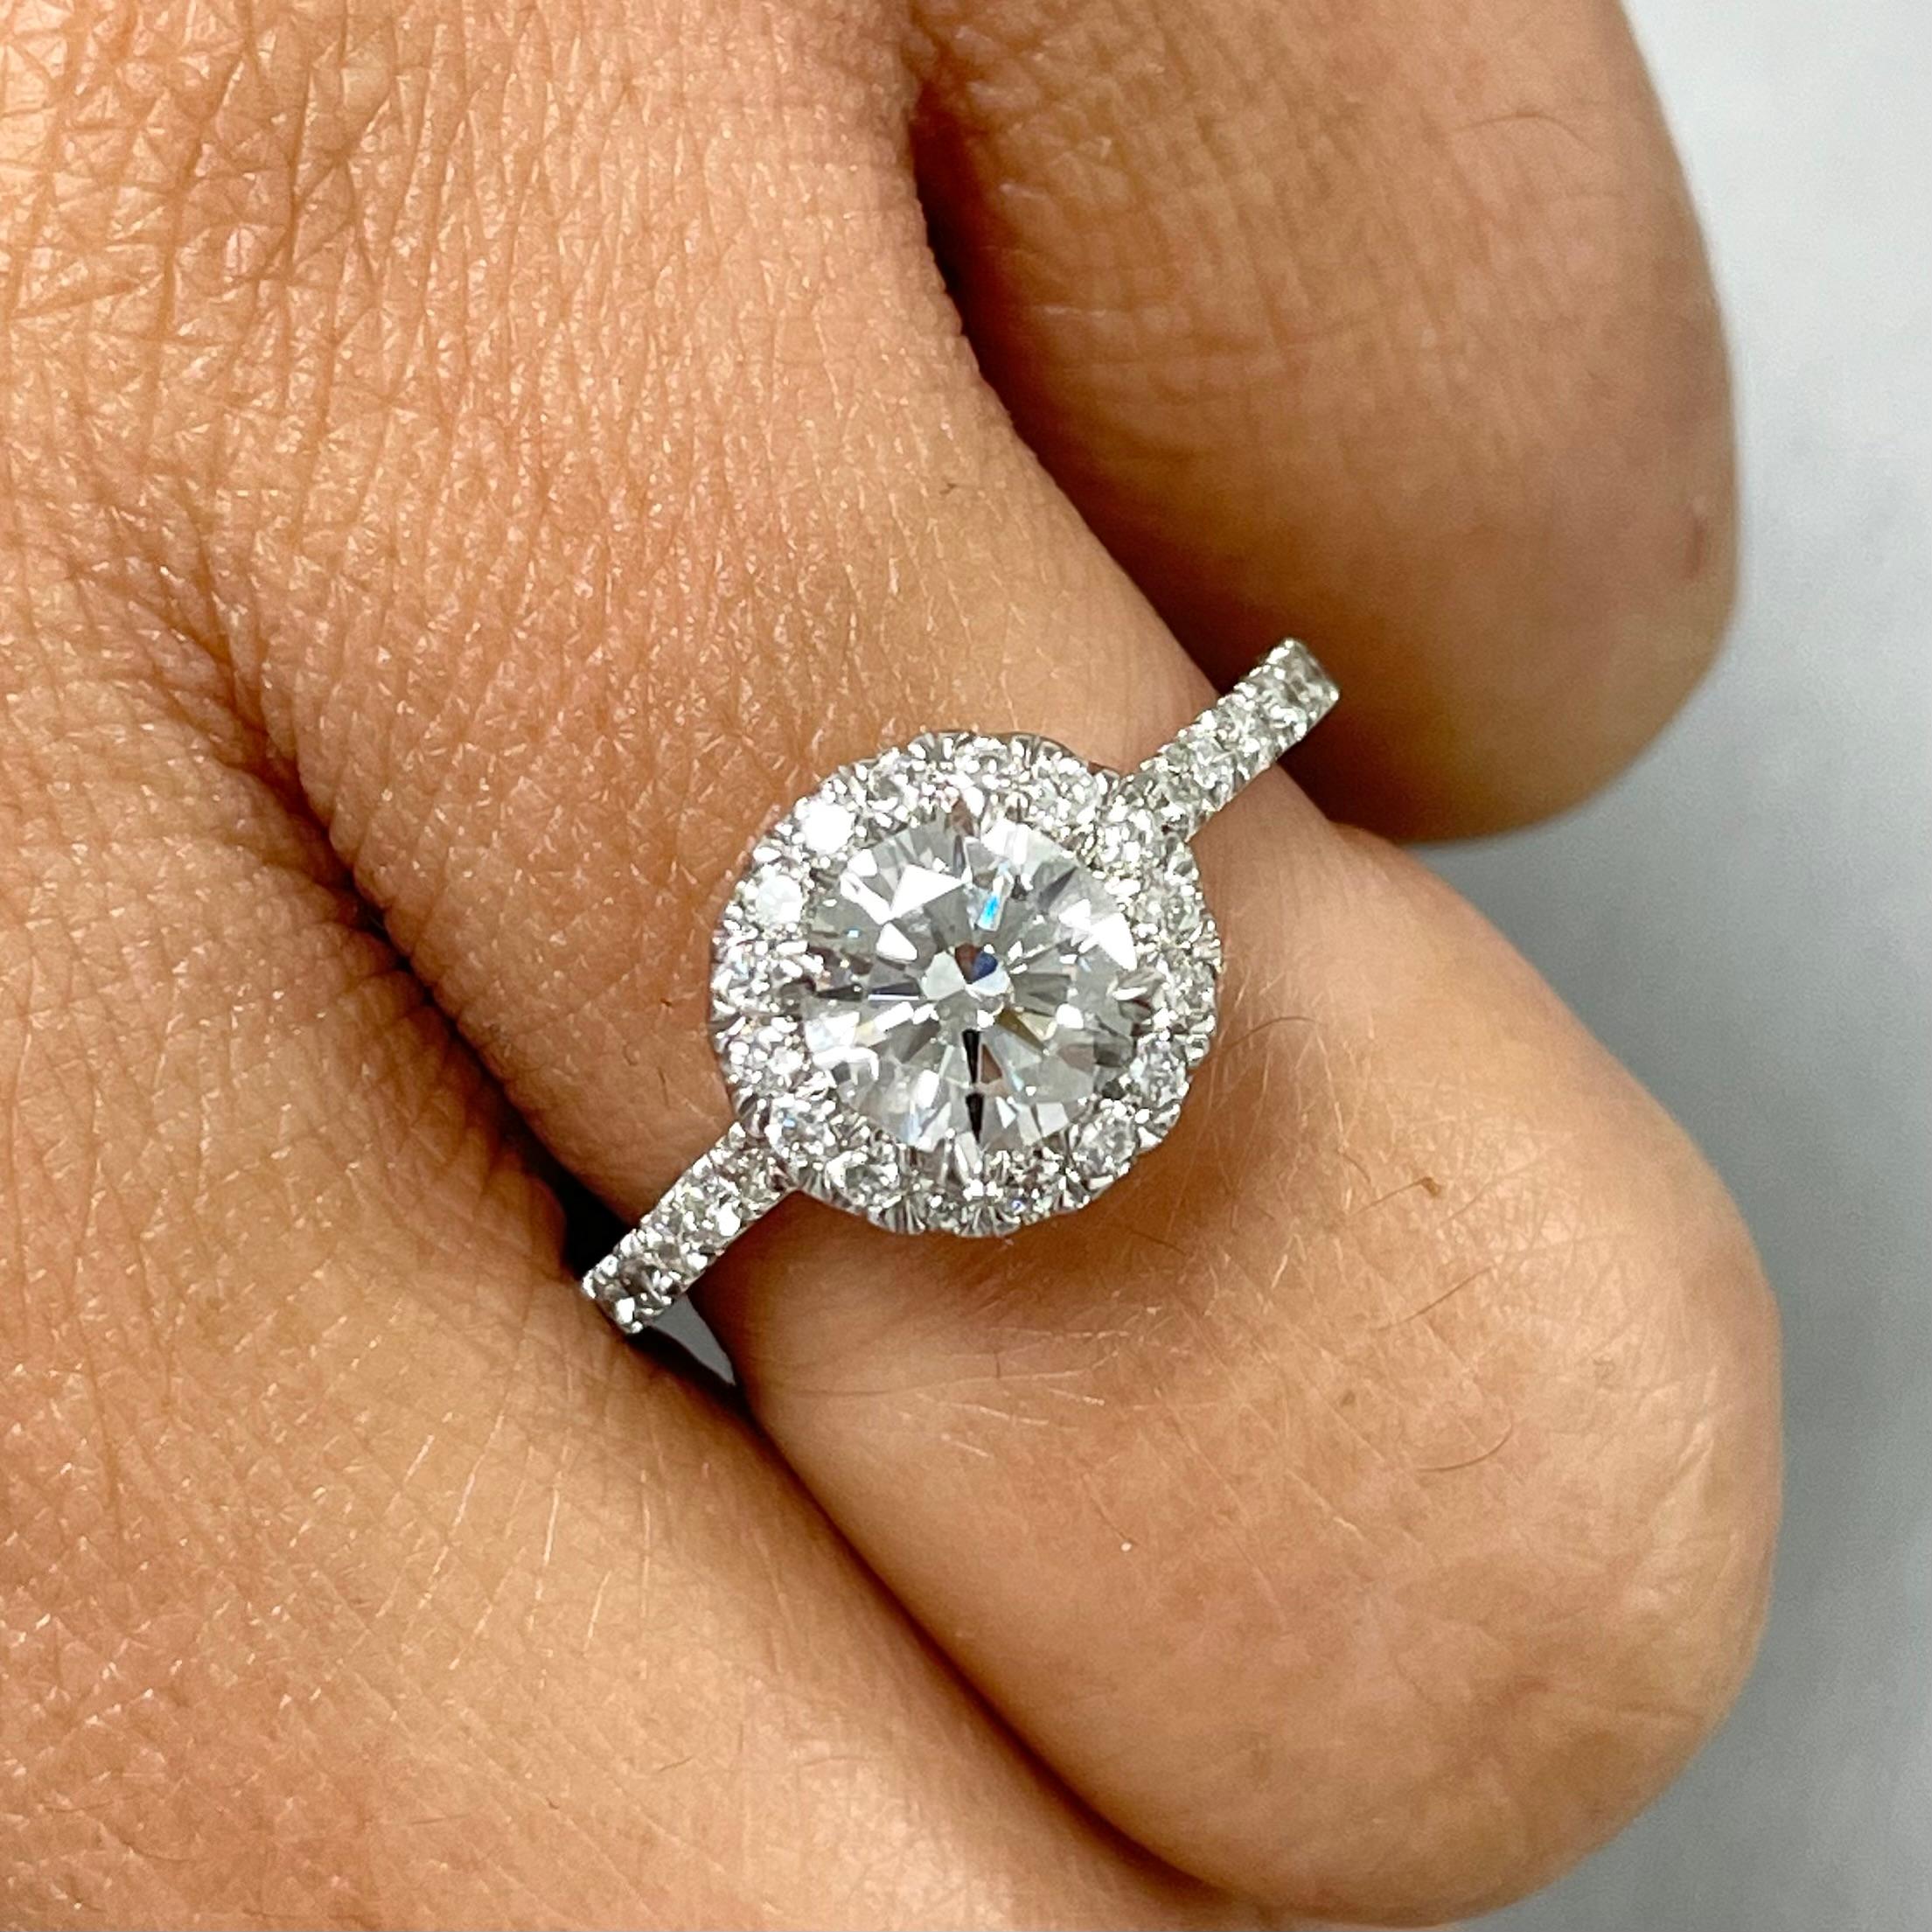 A timeless beauty, this 1 carat HVS2 center round diamond engagement ring with a halo around is elegant and endearing.

Center Diamond Shape: Round Brilliant
Center Diamond Weight: 1.00 ct 
Diamond Color: H
Diamond Clarity: VS2 (Very Slightly